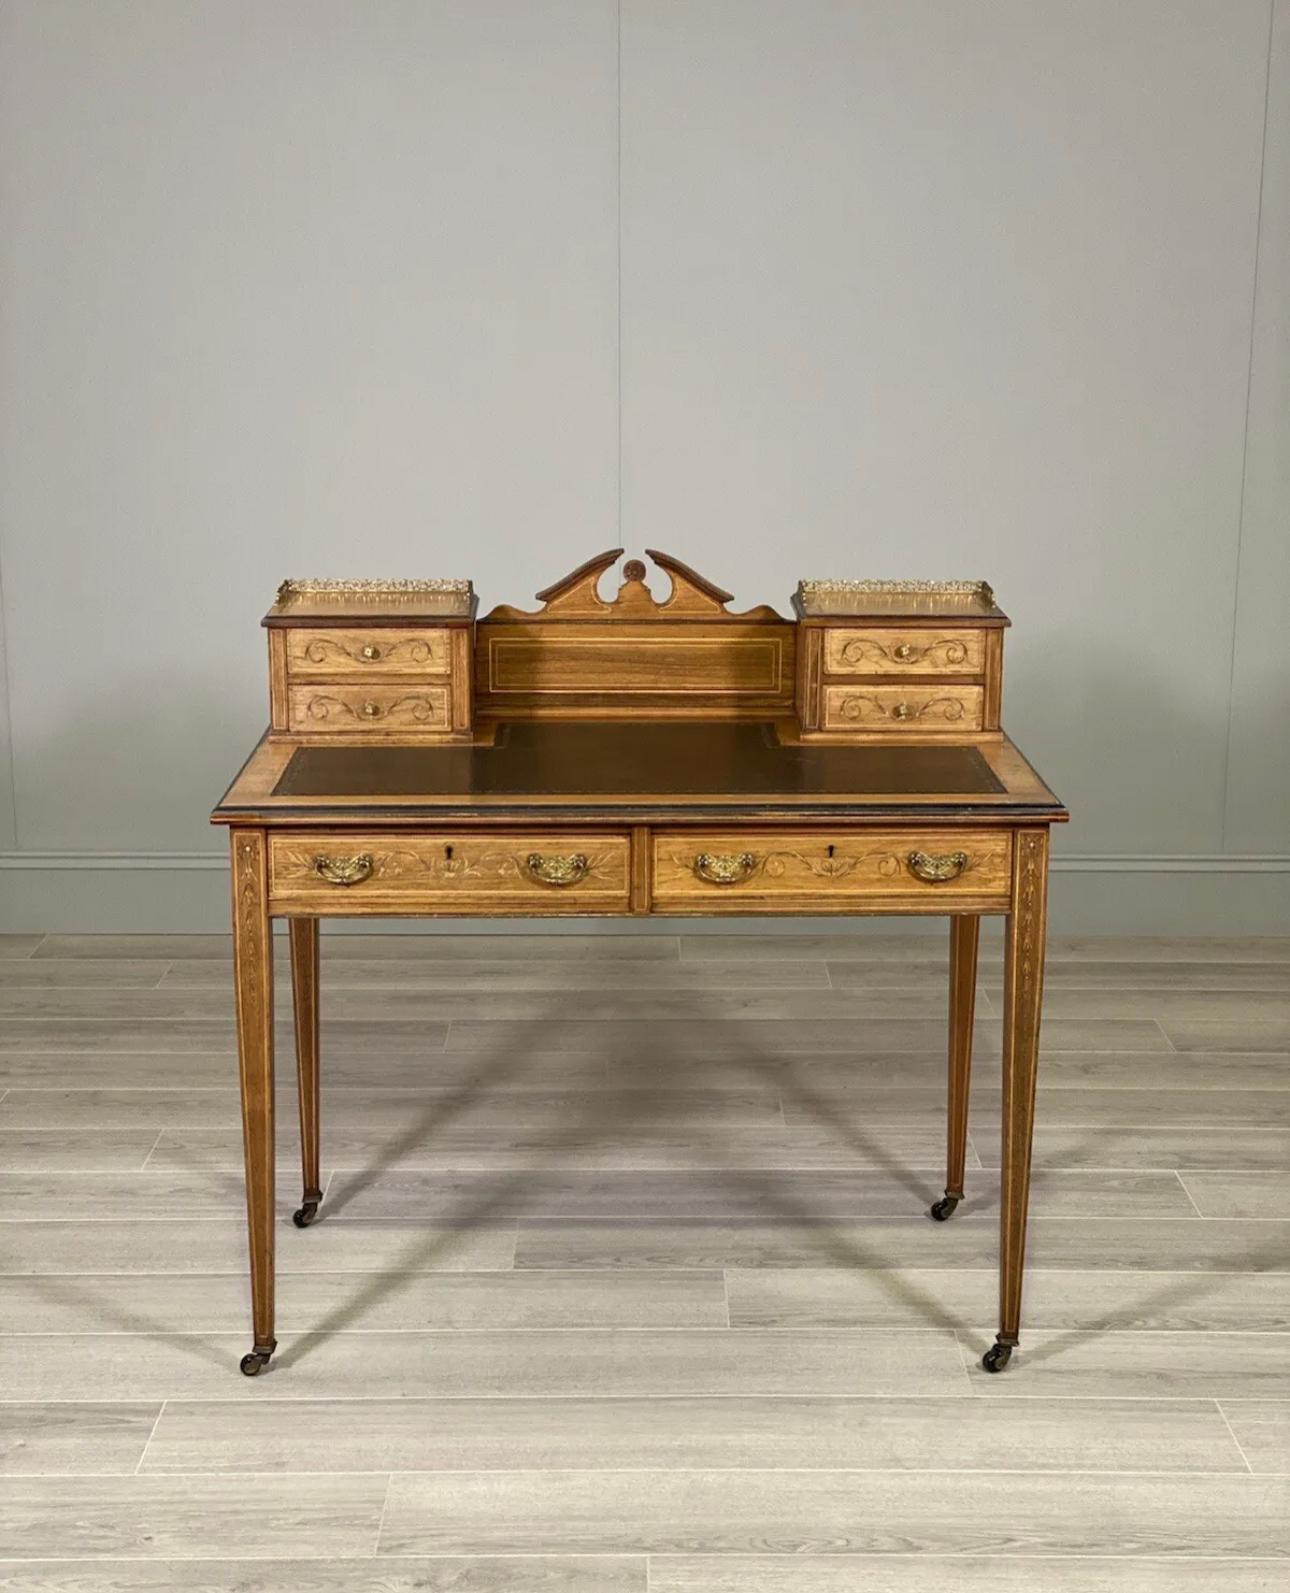 A fine quality desk made by the famous furniture maker Maple & Co. The desk has decorative inlayed rosewood veneers, four desktop drawers with brass galleries, two large drawers, original leather writing surface and site on tapered inlaid legs with